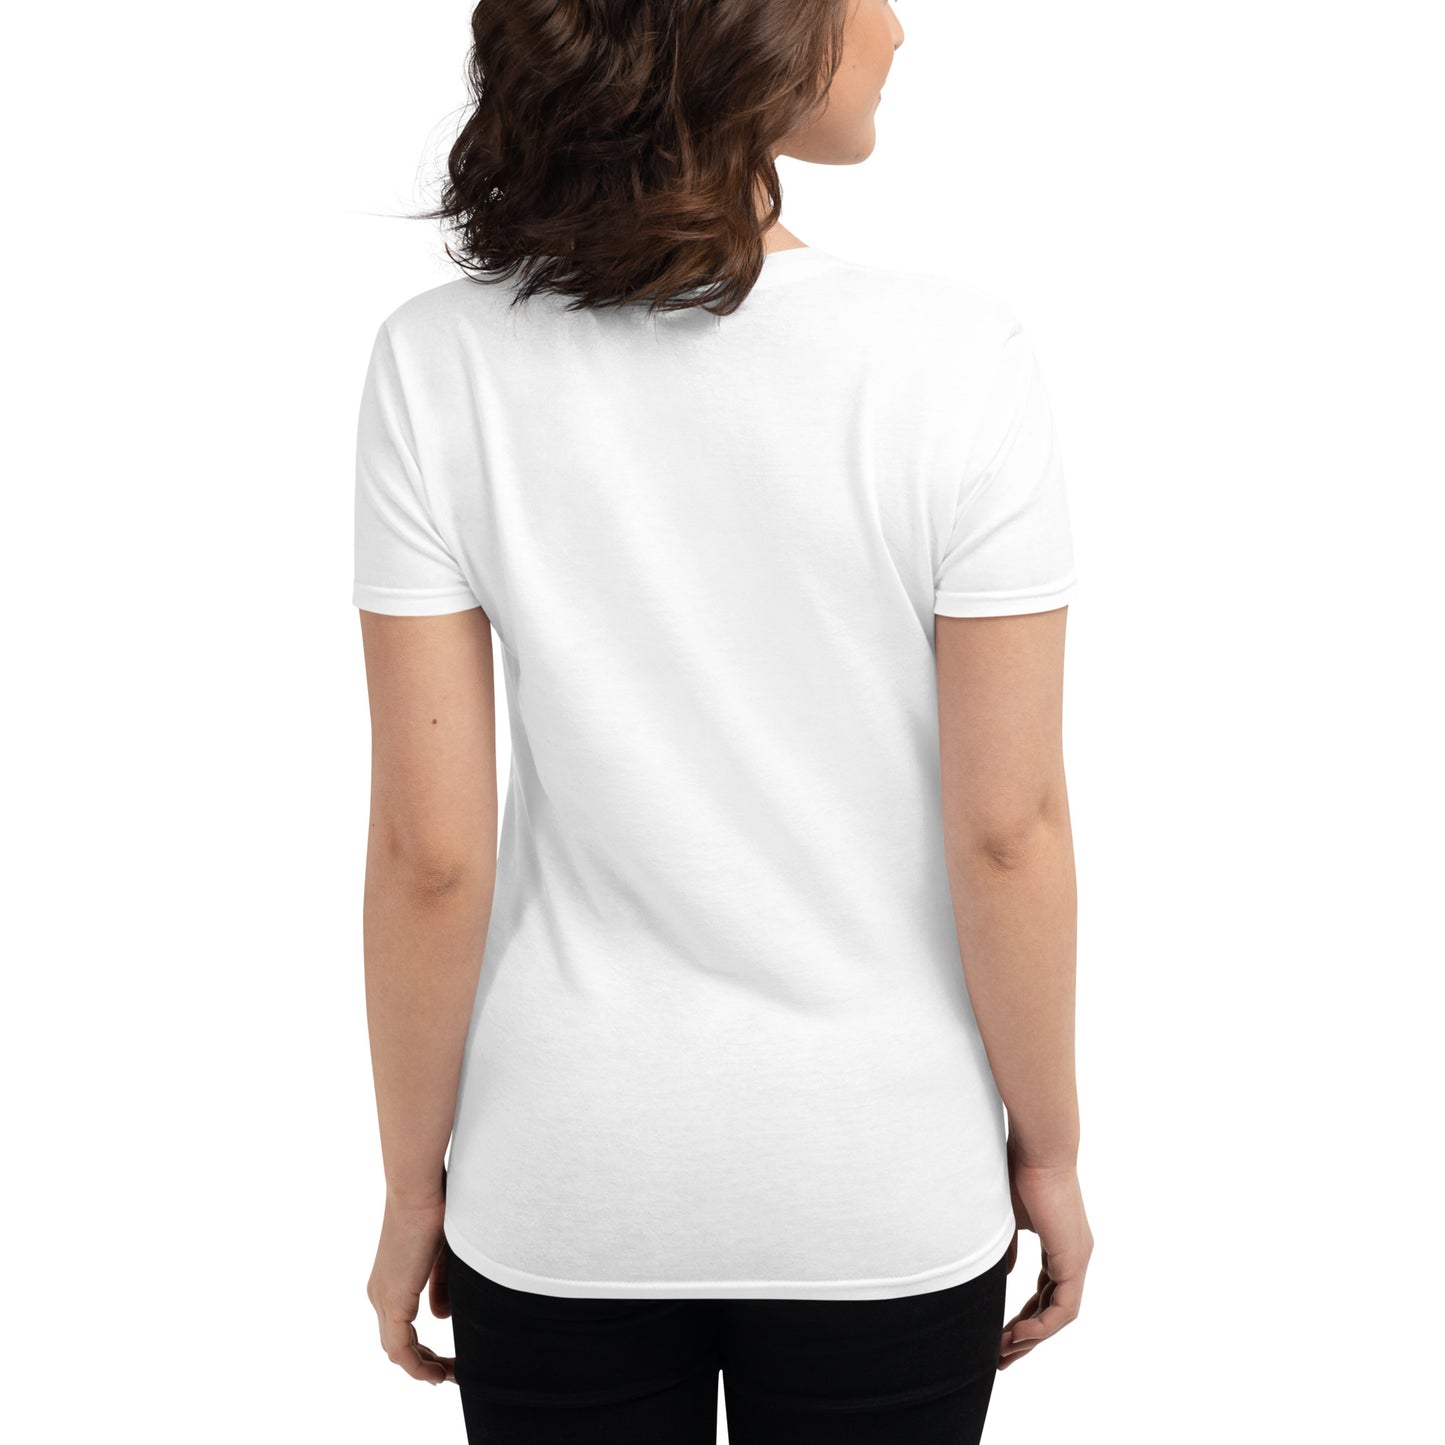 #SAVEMANGNUMPI Fitted Women's Tee - 2 colors